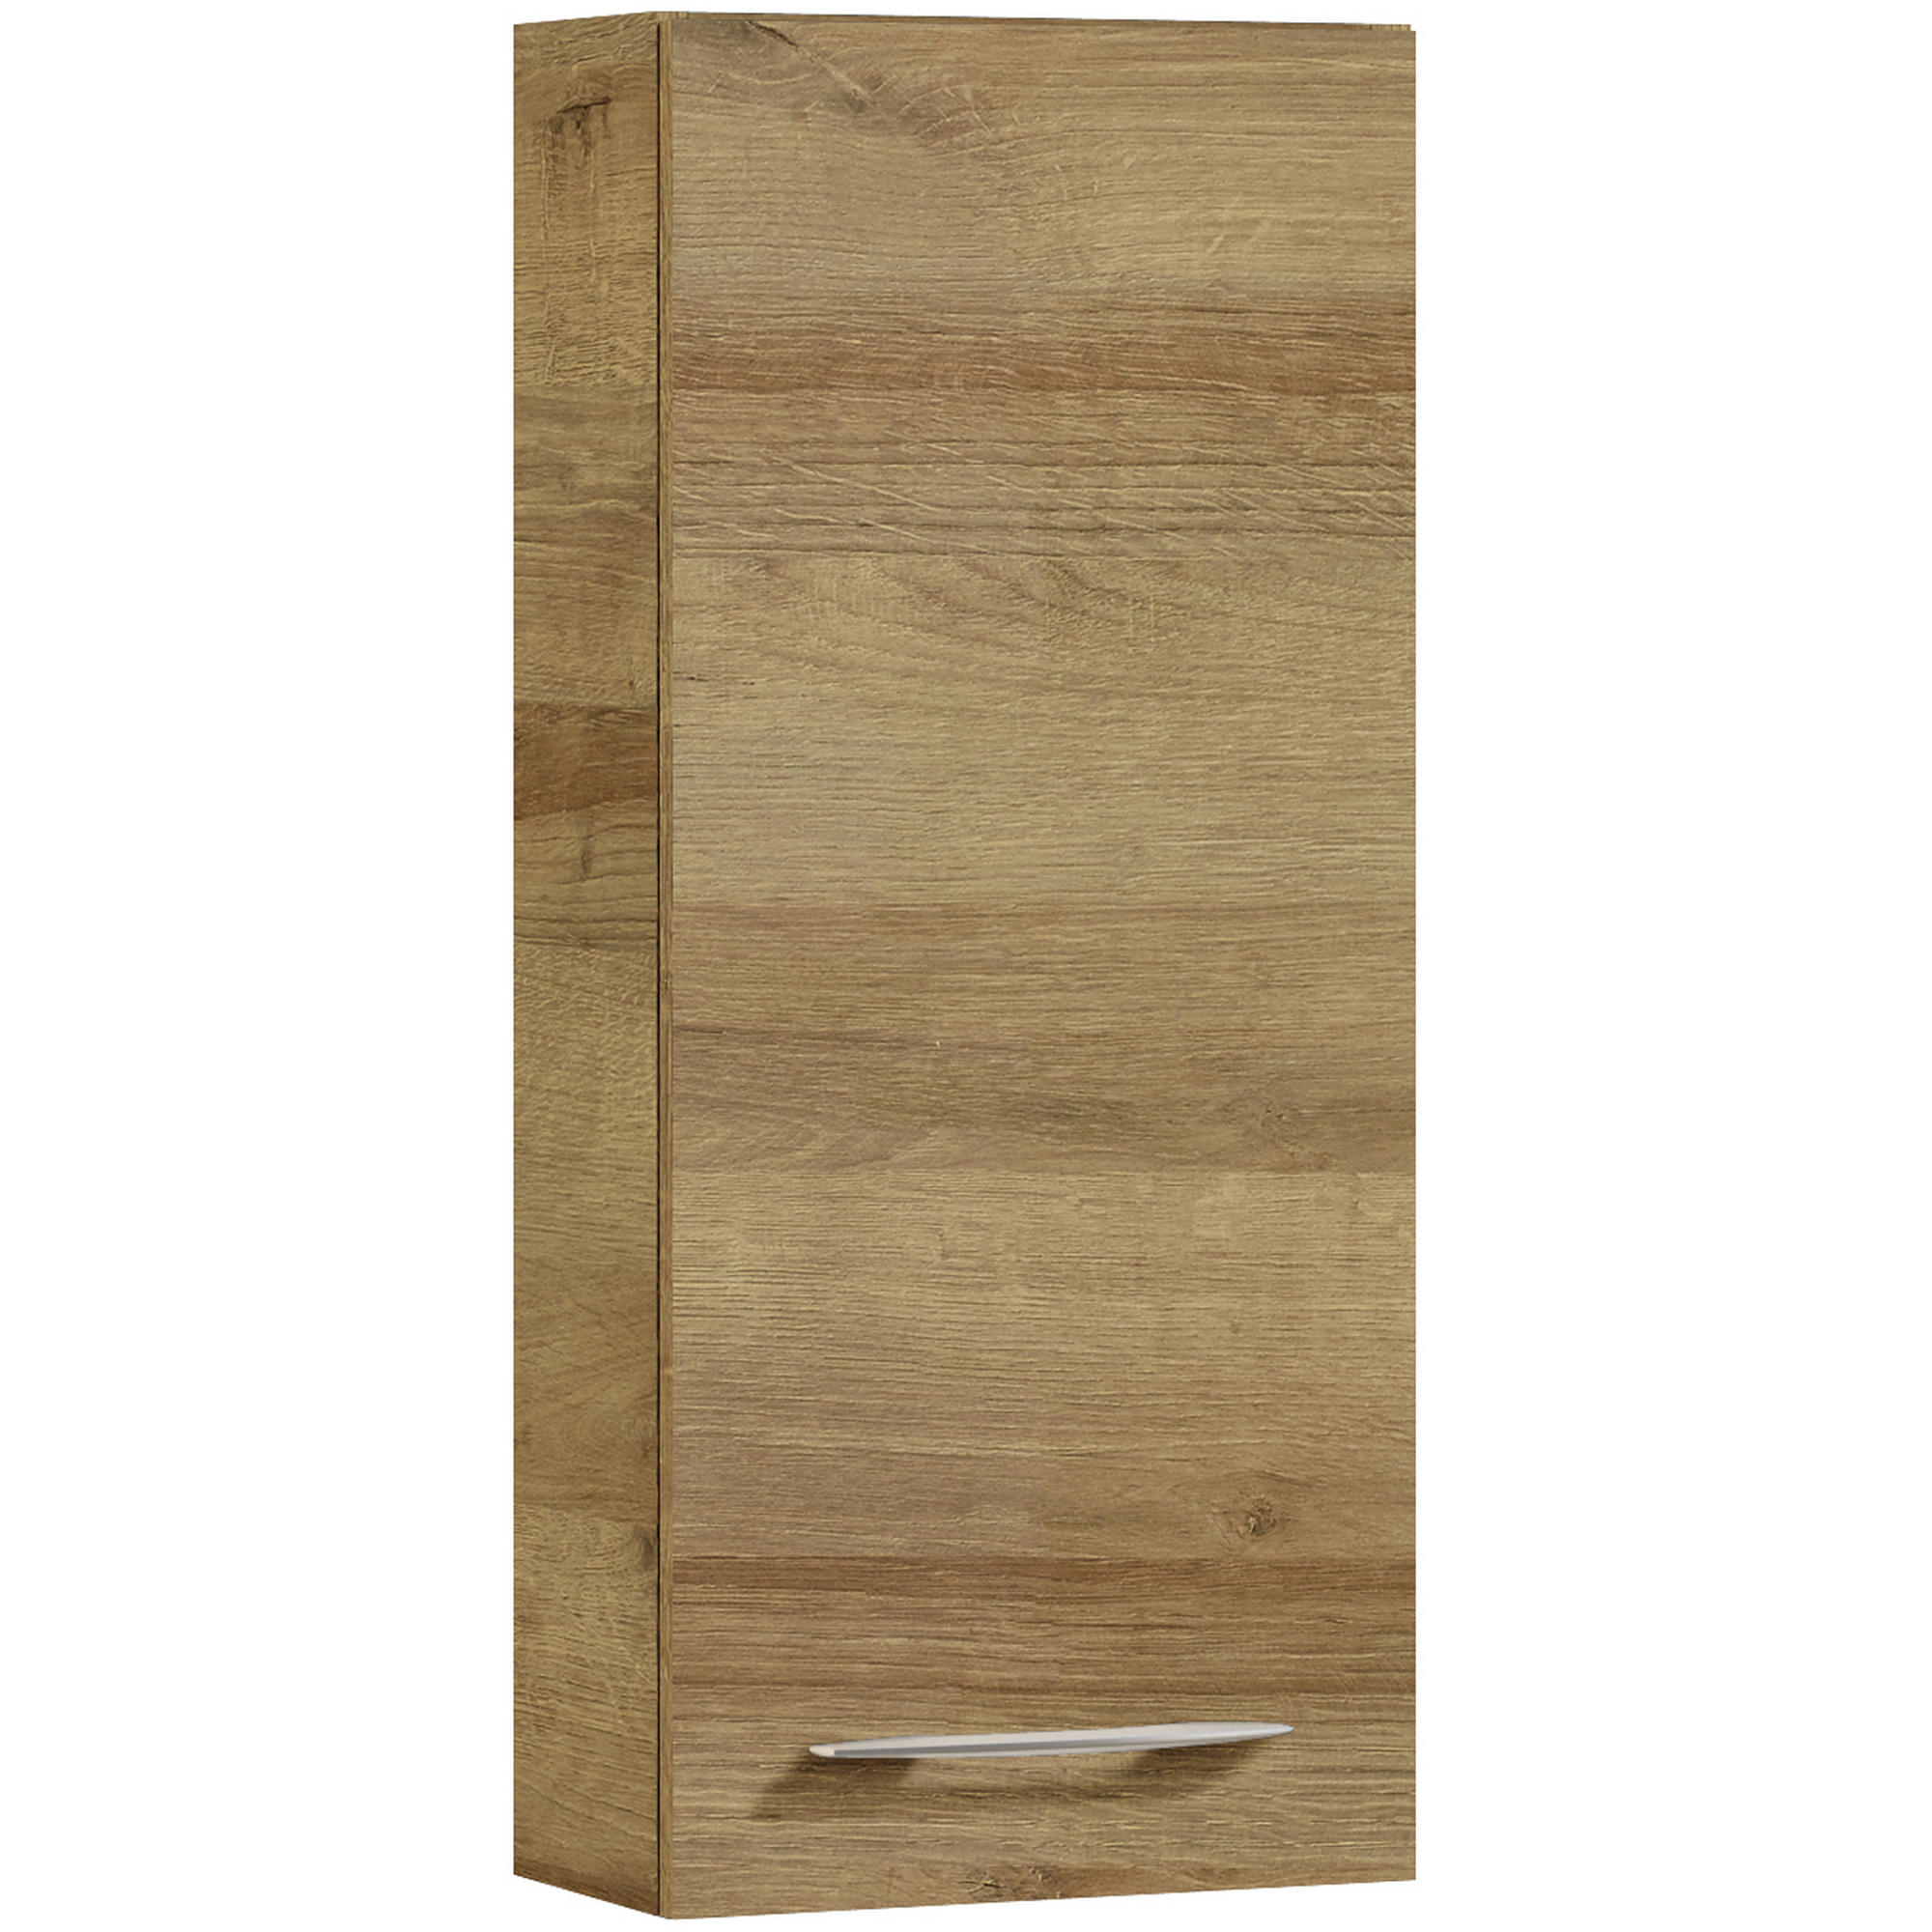 Wandschrank 'Indra' Riviera Eiche 30 x 70 x 17 cm + product picture